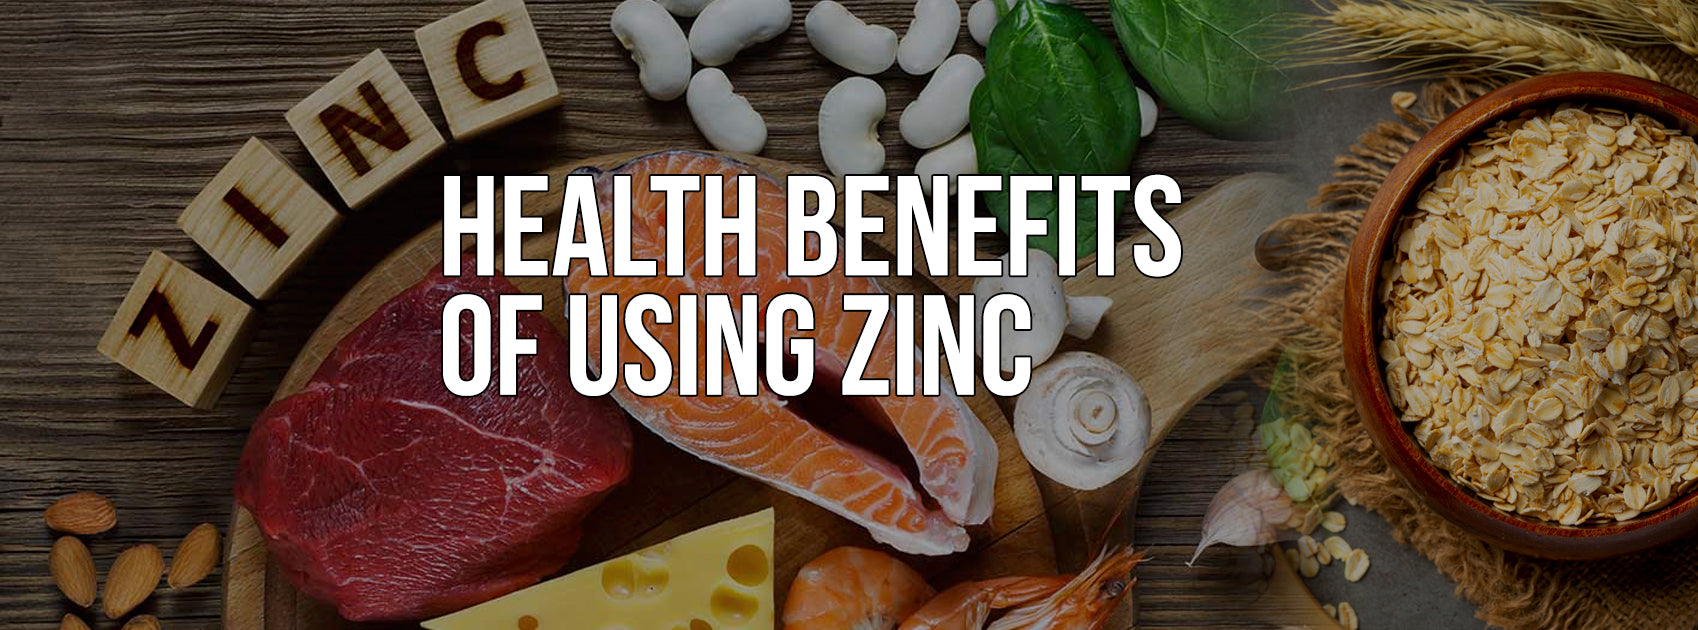 HEALTH BENEFITS OF USING ZINC & IT'S ROLES ON YOUR BODY